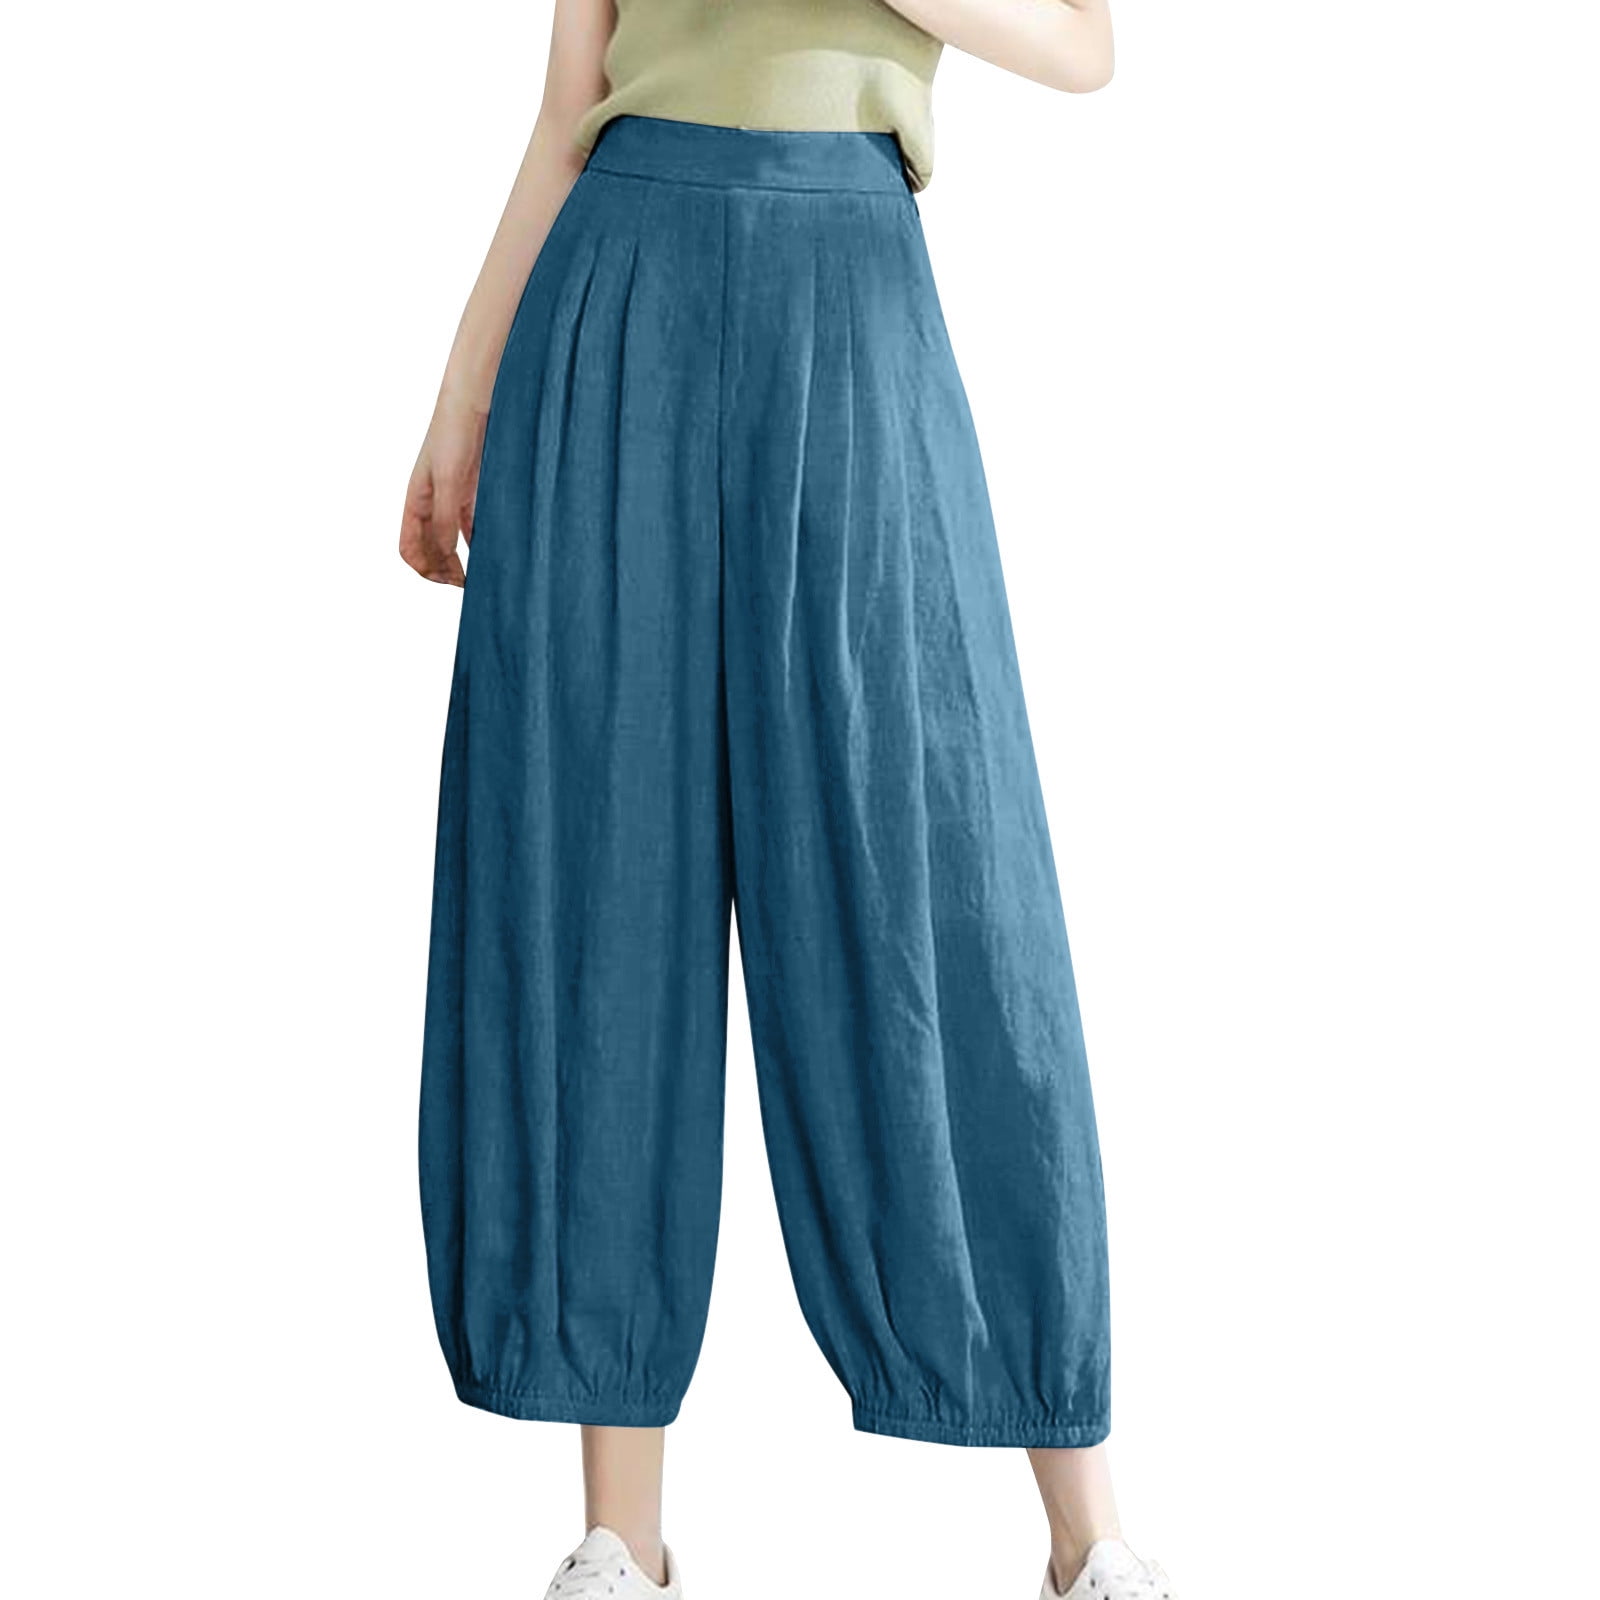 Fsqjgq Wide Leg Pants for Women High Waisted Work Pants for Women Casual  High Waisted Pants Leg Pant Trousers with Pocket Loose Solid Pants Blue L 